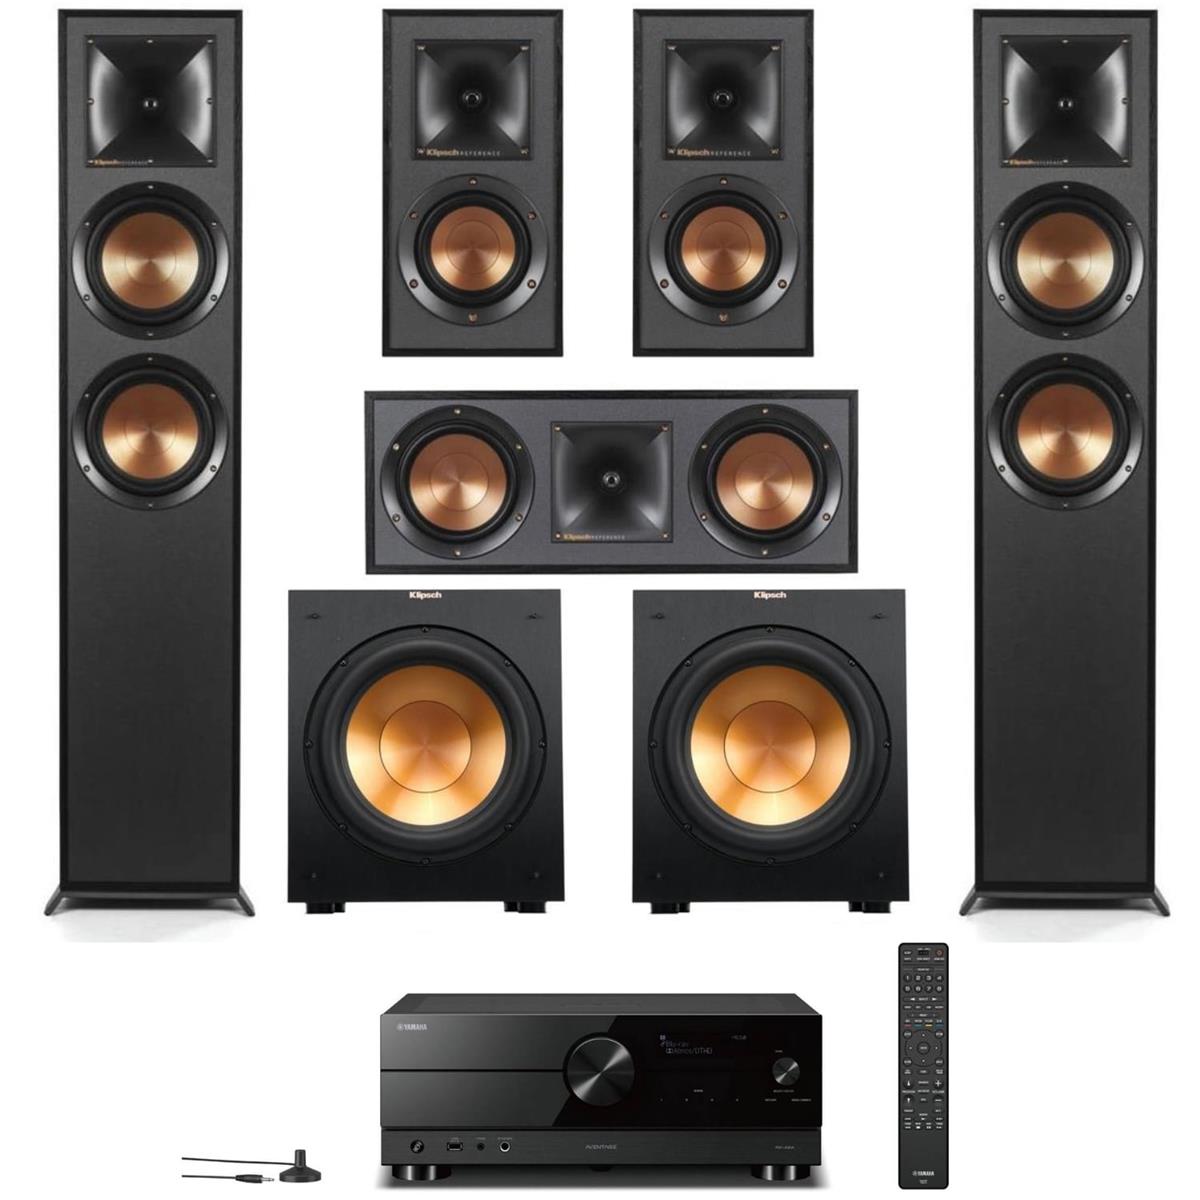 Klipsch Speakers 2x R-625FA  + 2x R-41M + R-52C Center + 2x R-12SW Subwoofers + Yamaha RX-A2A Receiver $1499 + free s/h